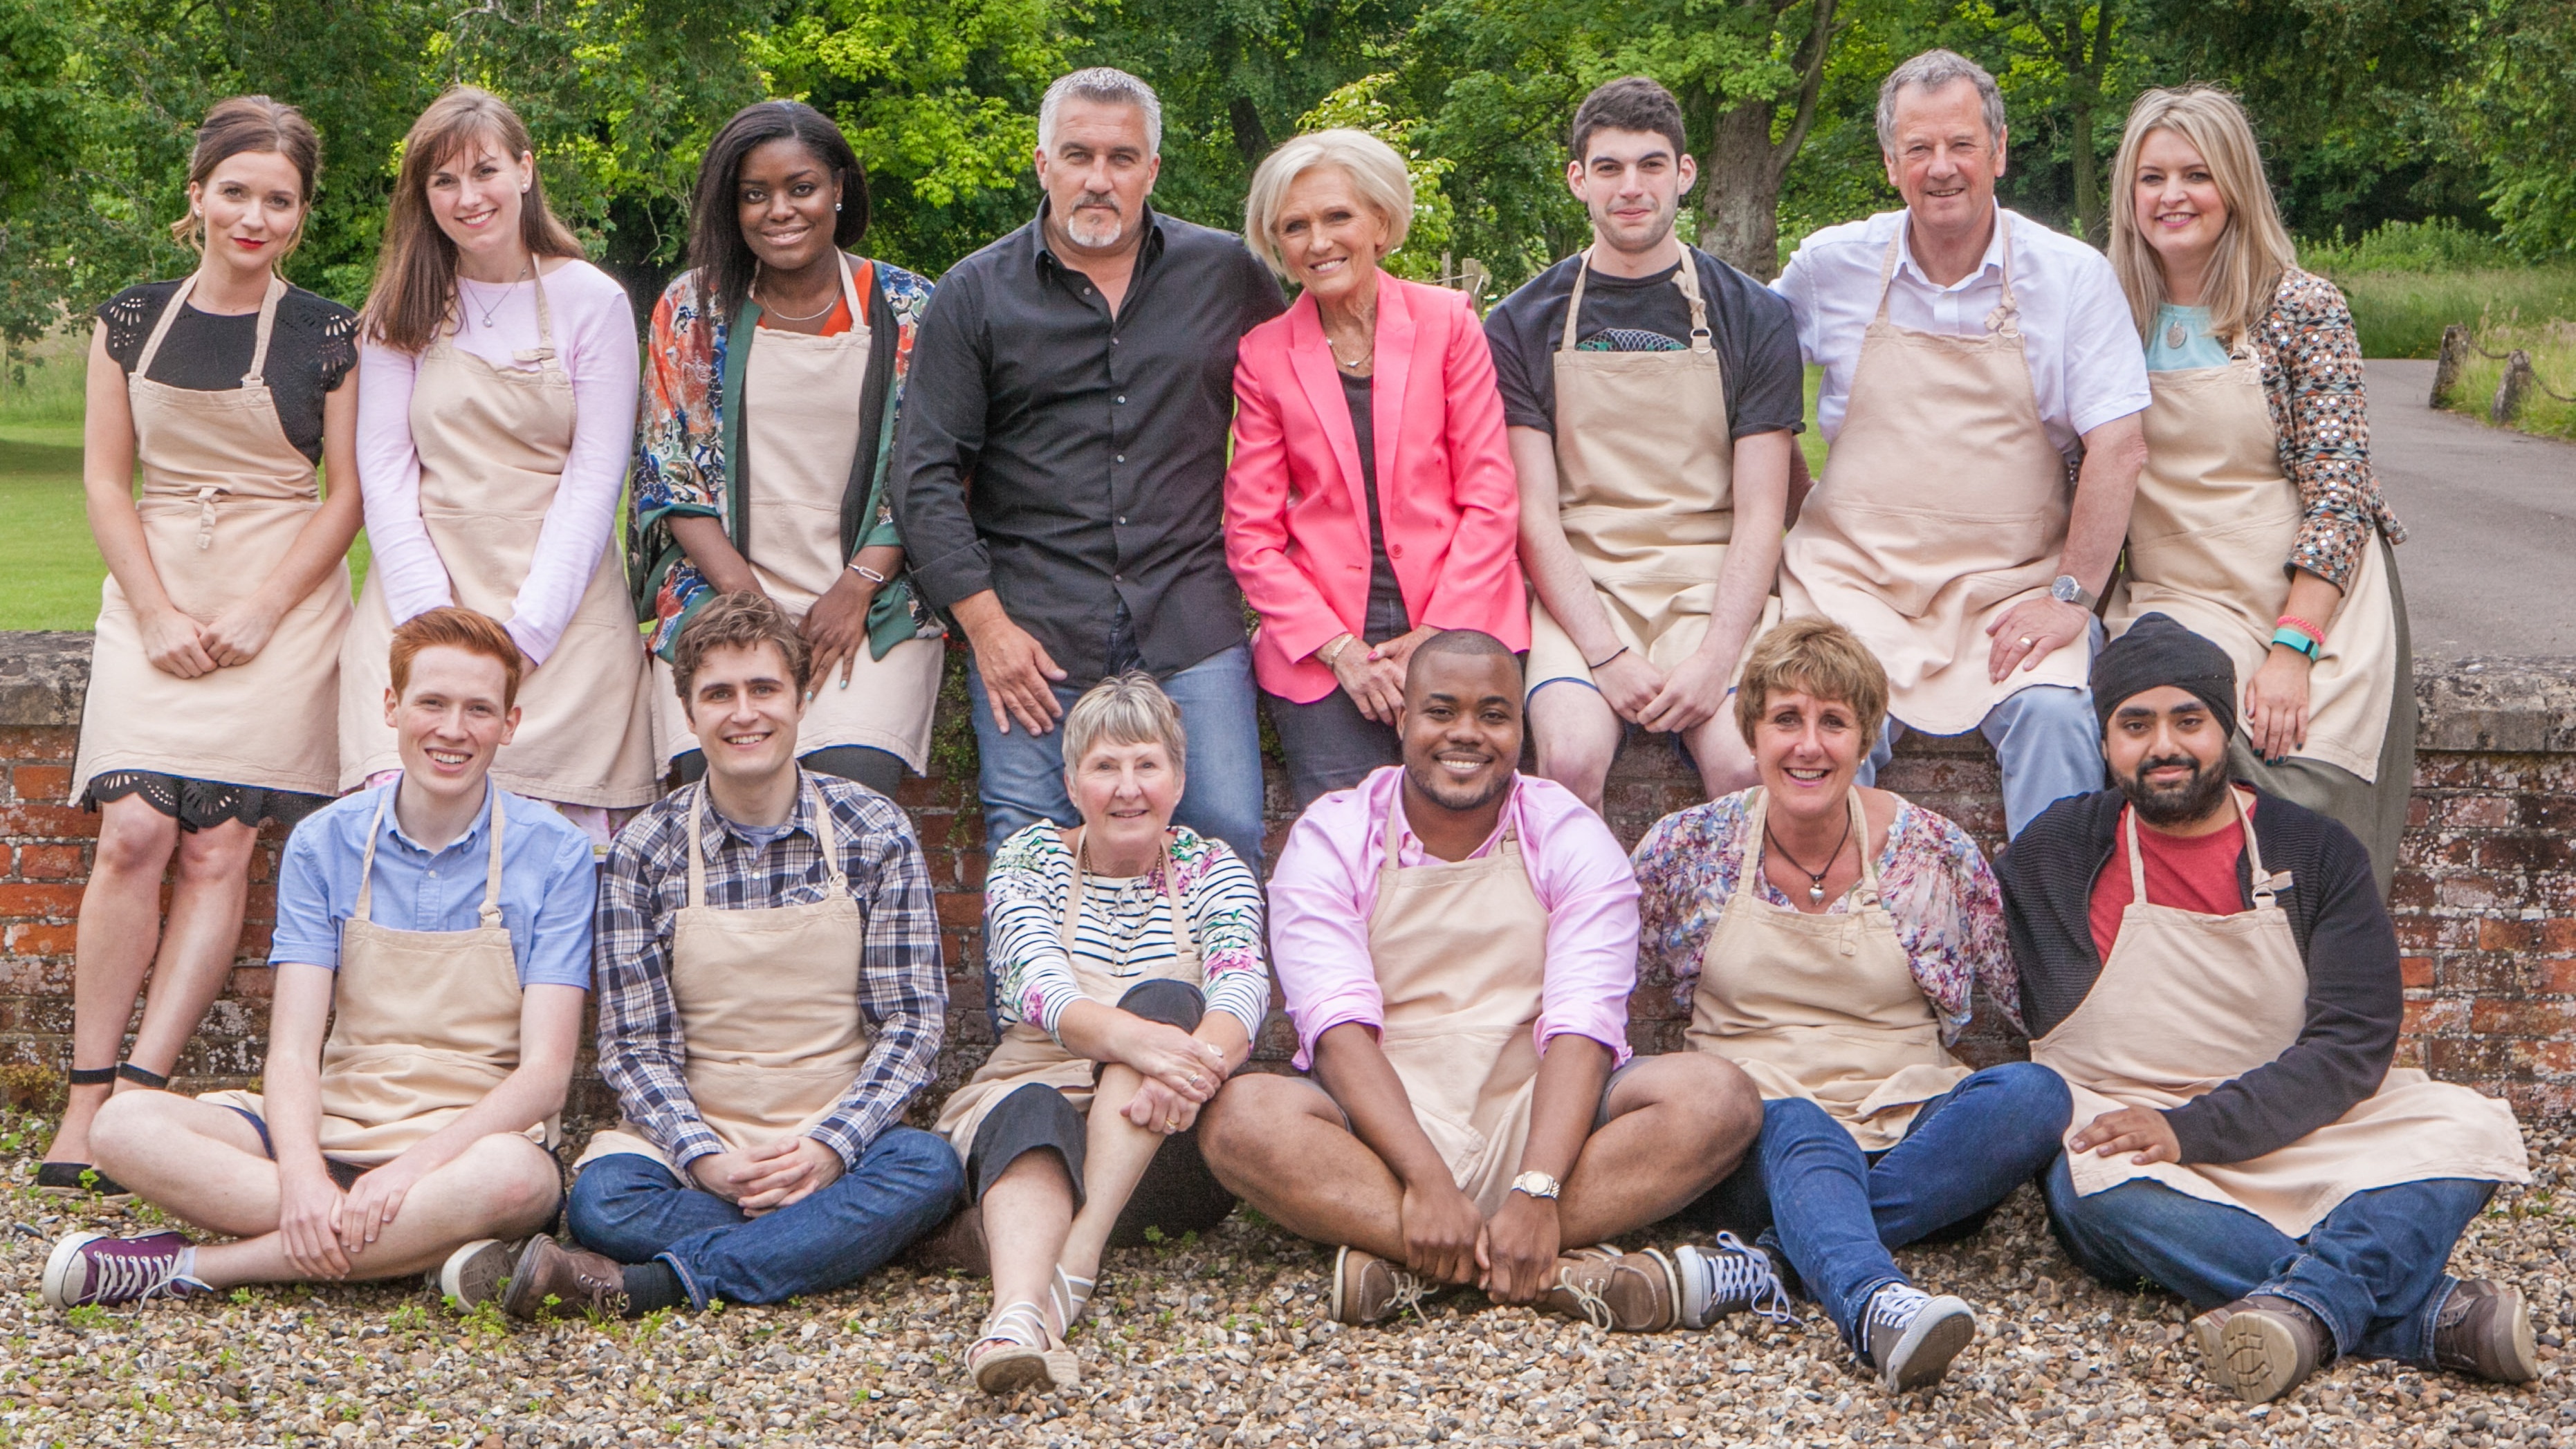 Everything you need to know about the Great British Bake Off